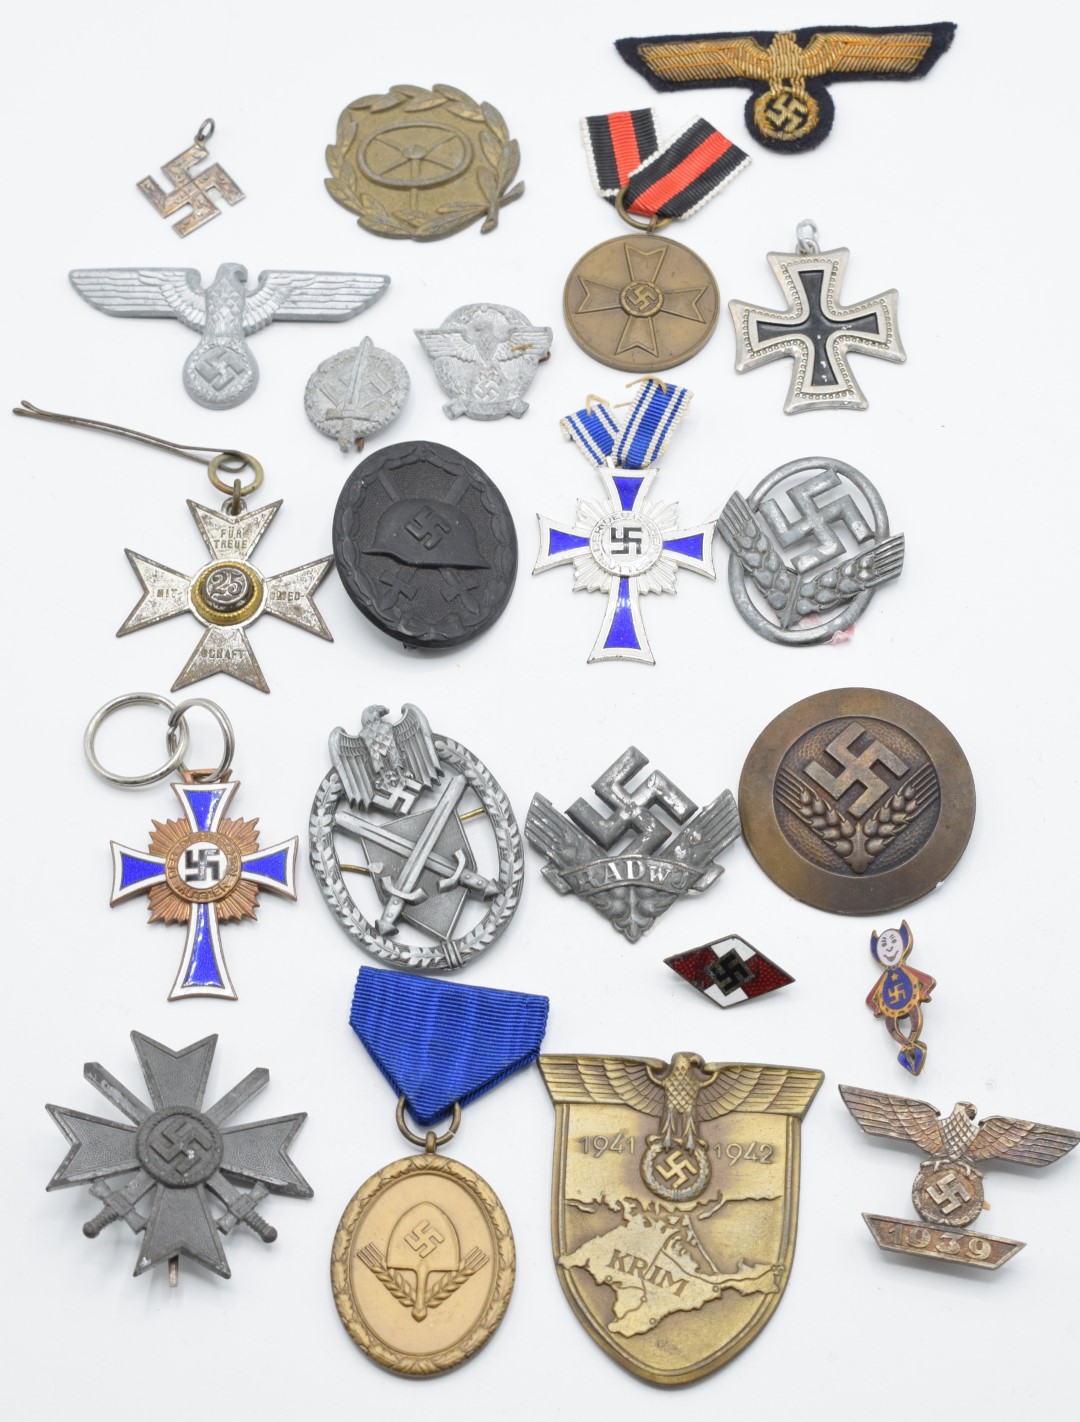 German Third Reich Nazi badges including a cloth Luftwaffe badge, Hitler Youth pin back enamel